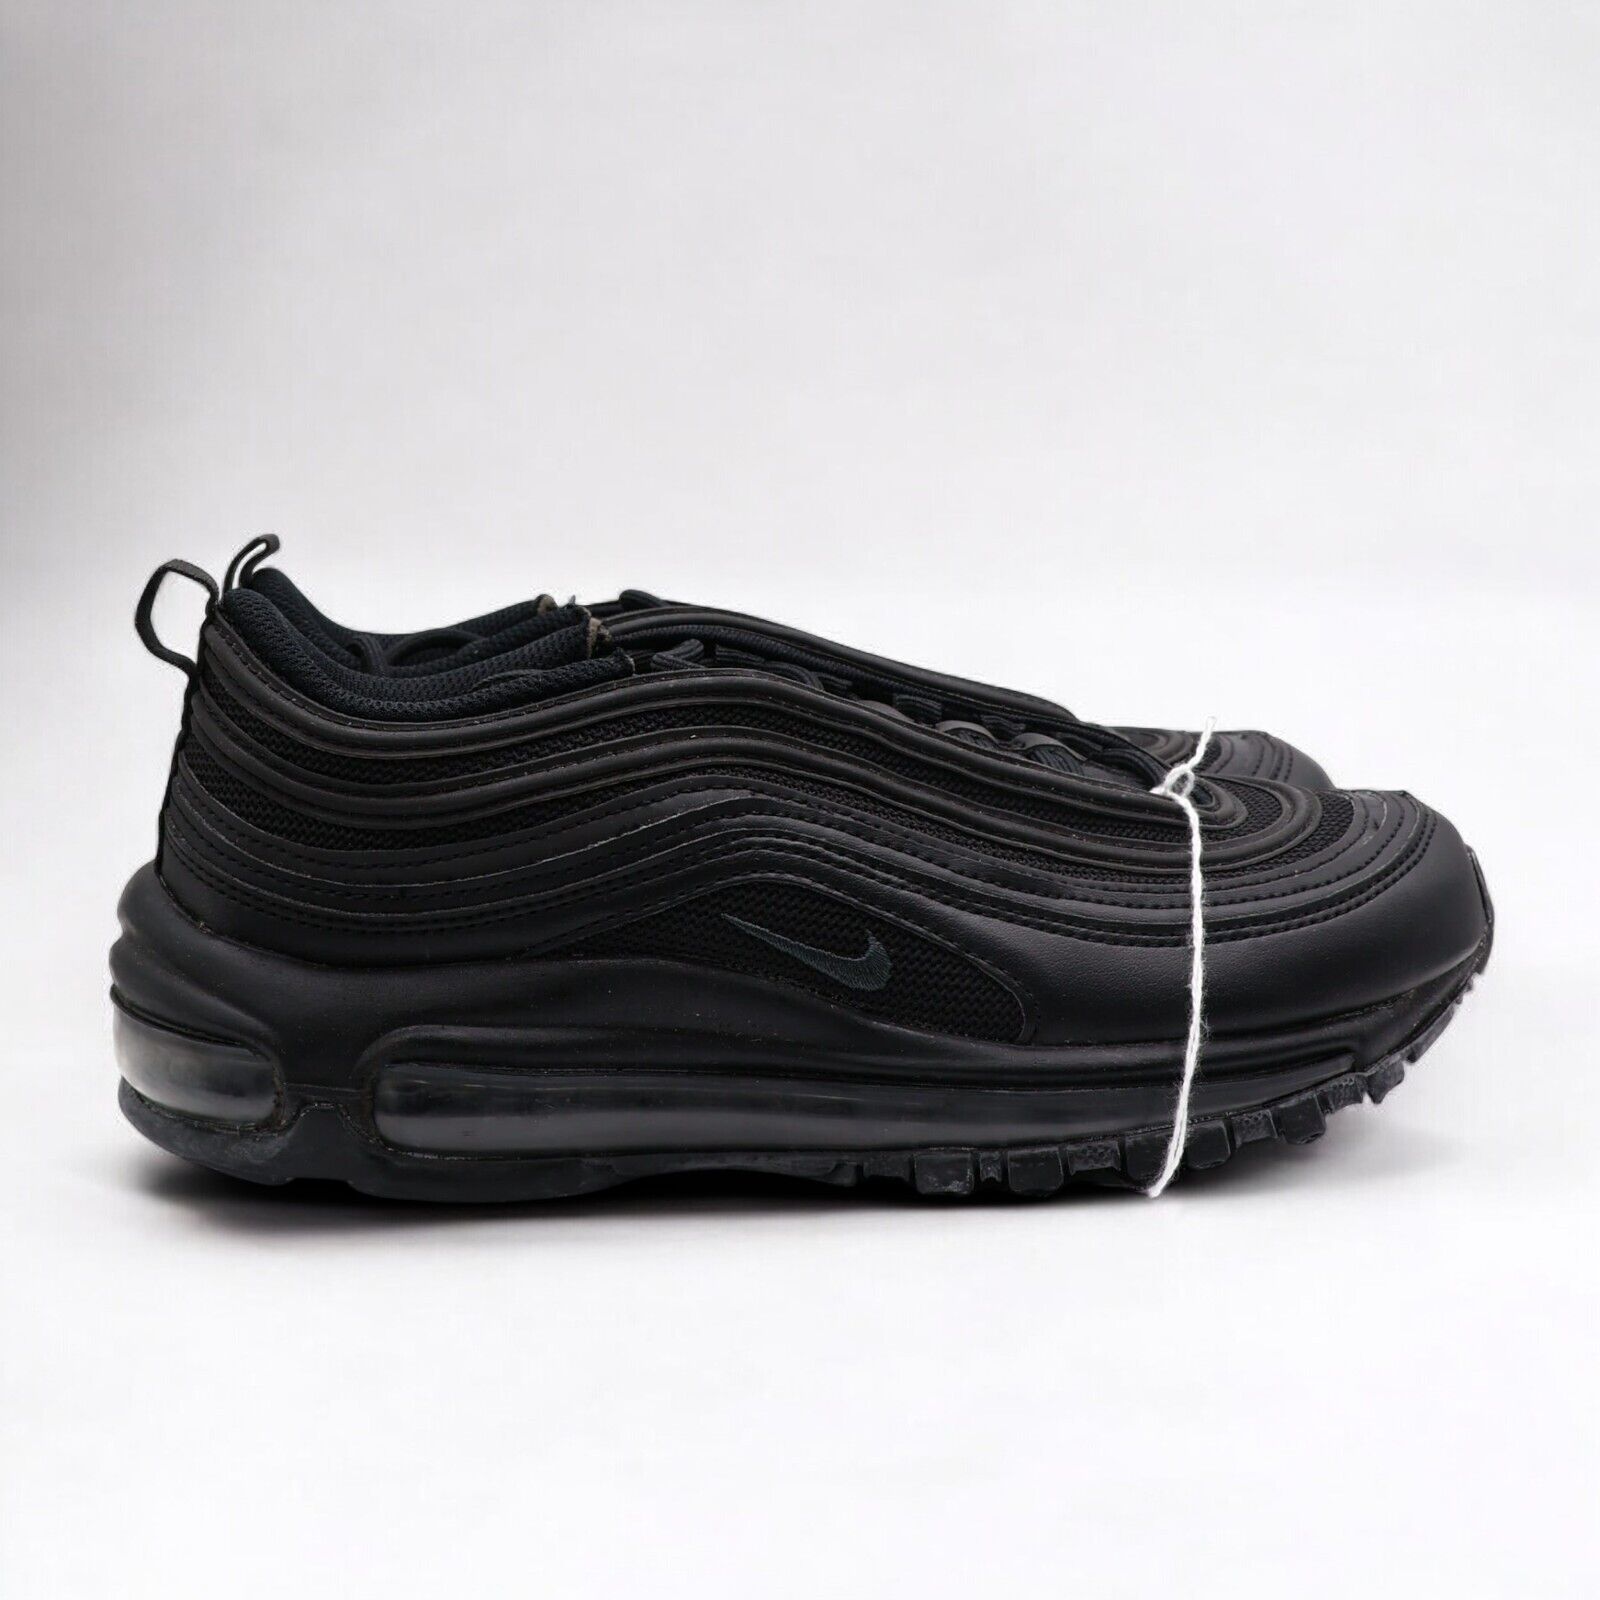 Magnificent Nike Air Max 97 Women’s Running Shoes Sneakers Size 7.5 on eBay